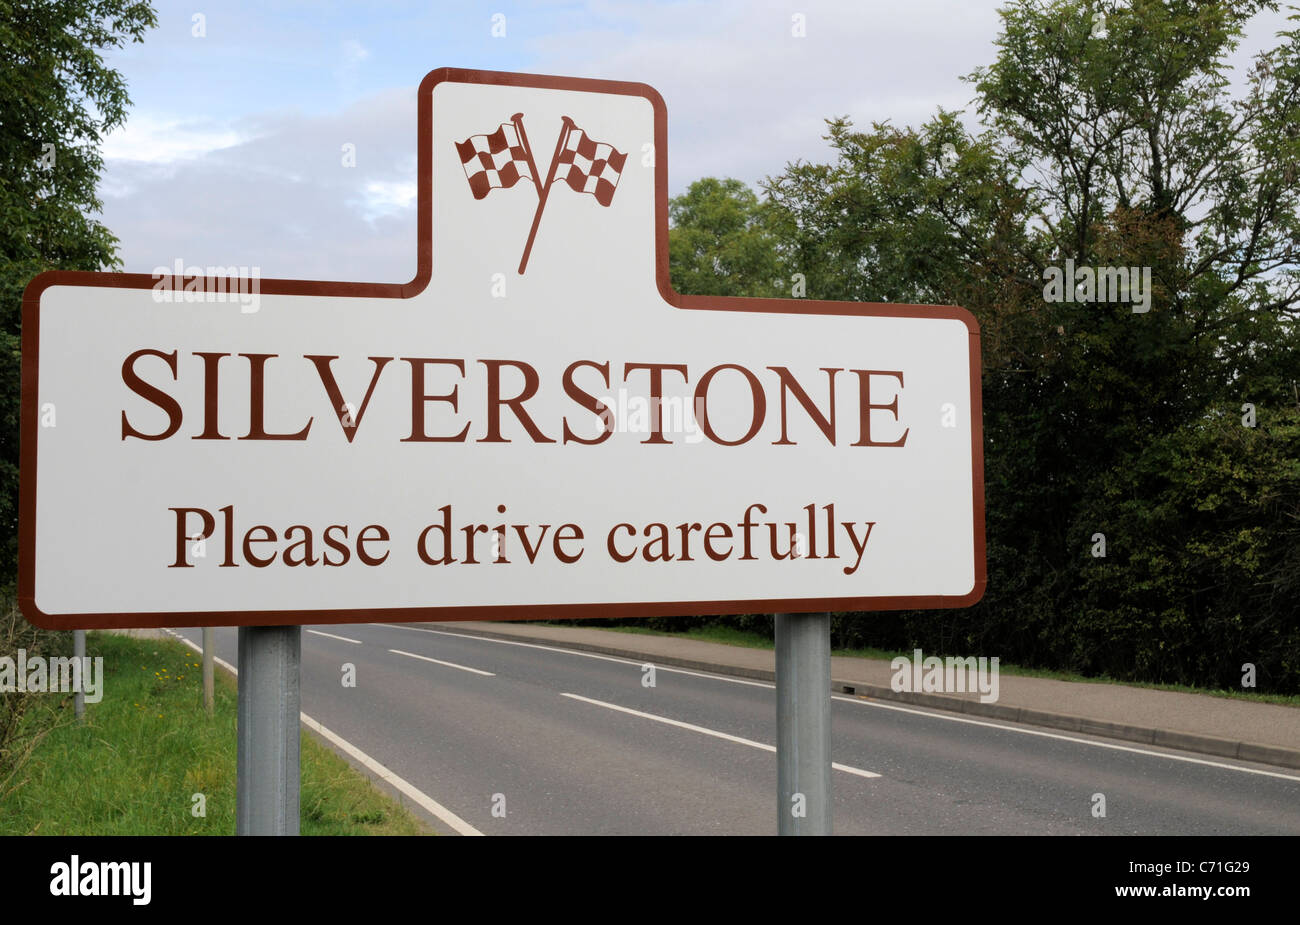 Silverstone Road Sign Stock Photo